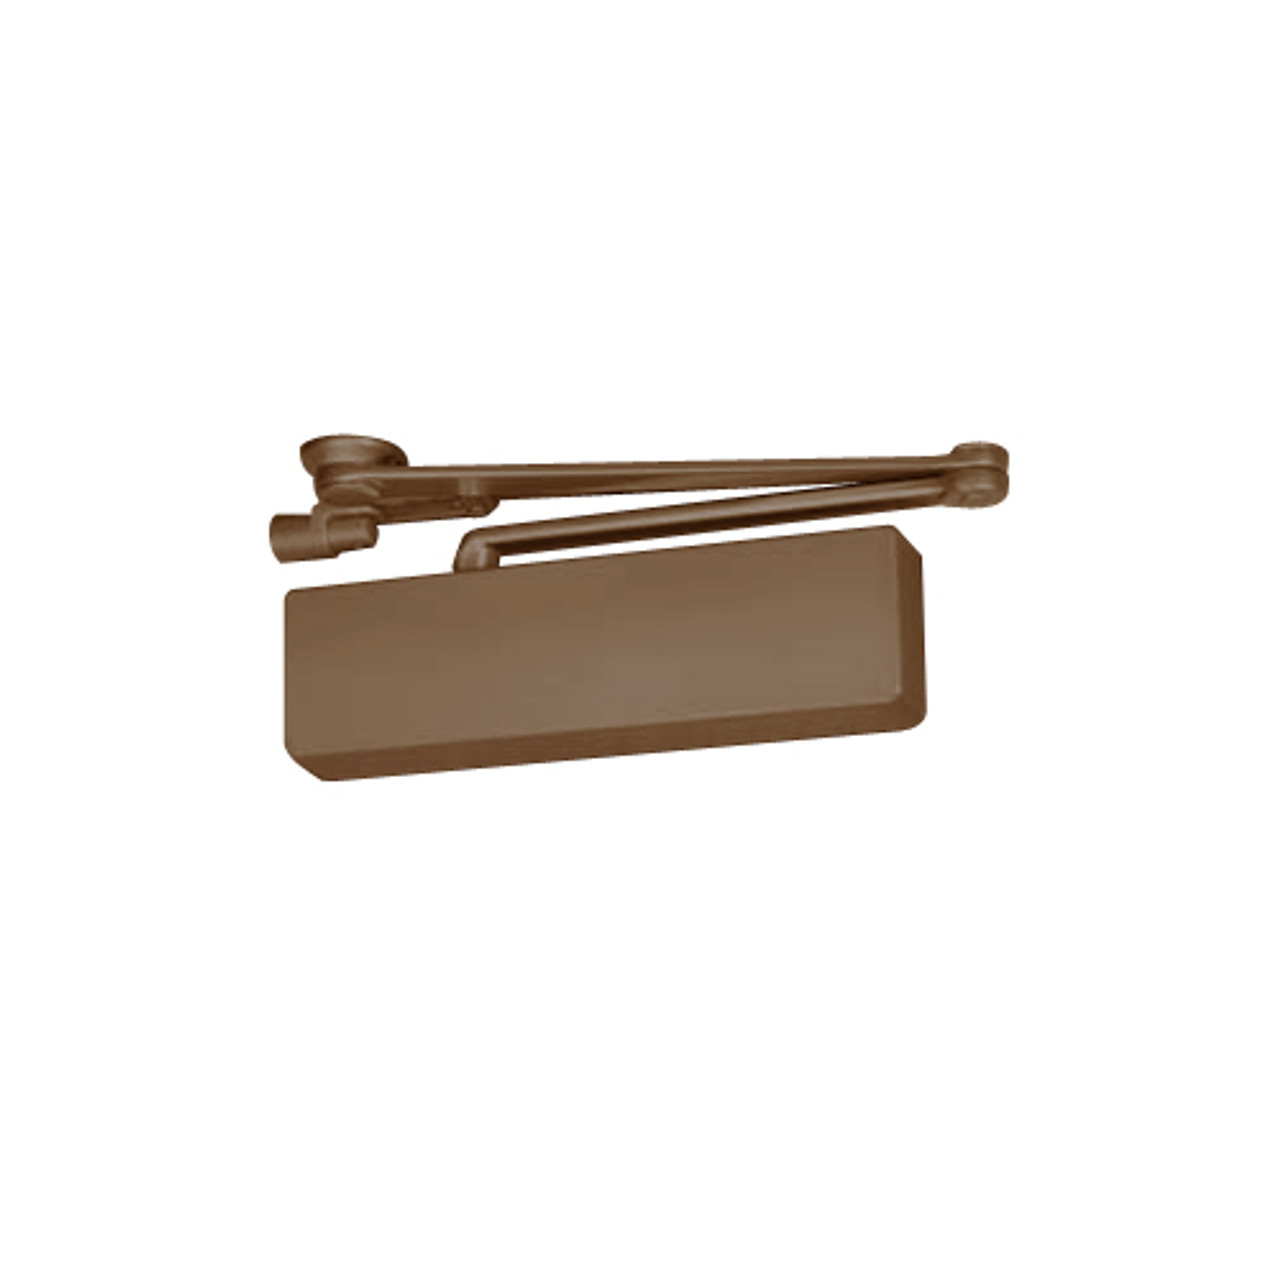 CPS7570-691-LH Norton 7570 Series Security Door Closer with CloserPlus Spring Arm in Dull Bronze Finish